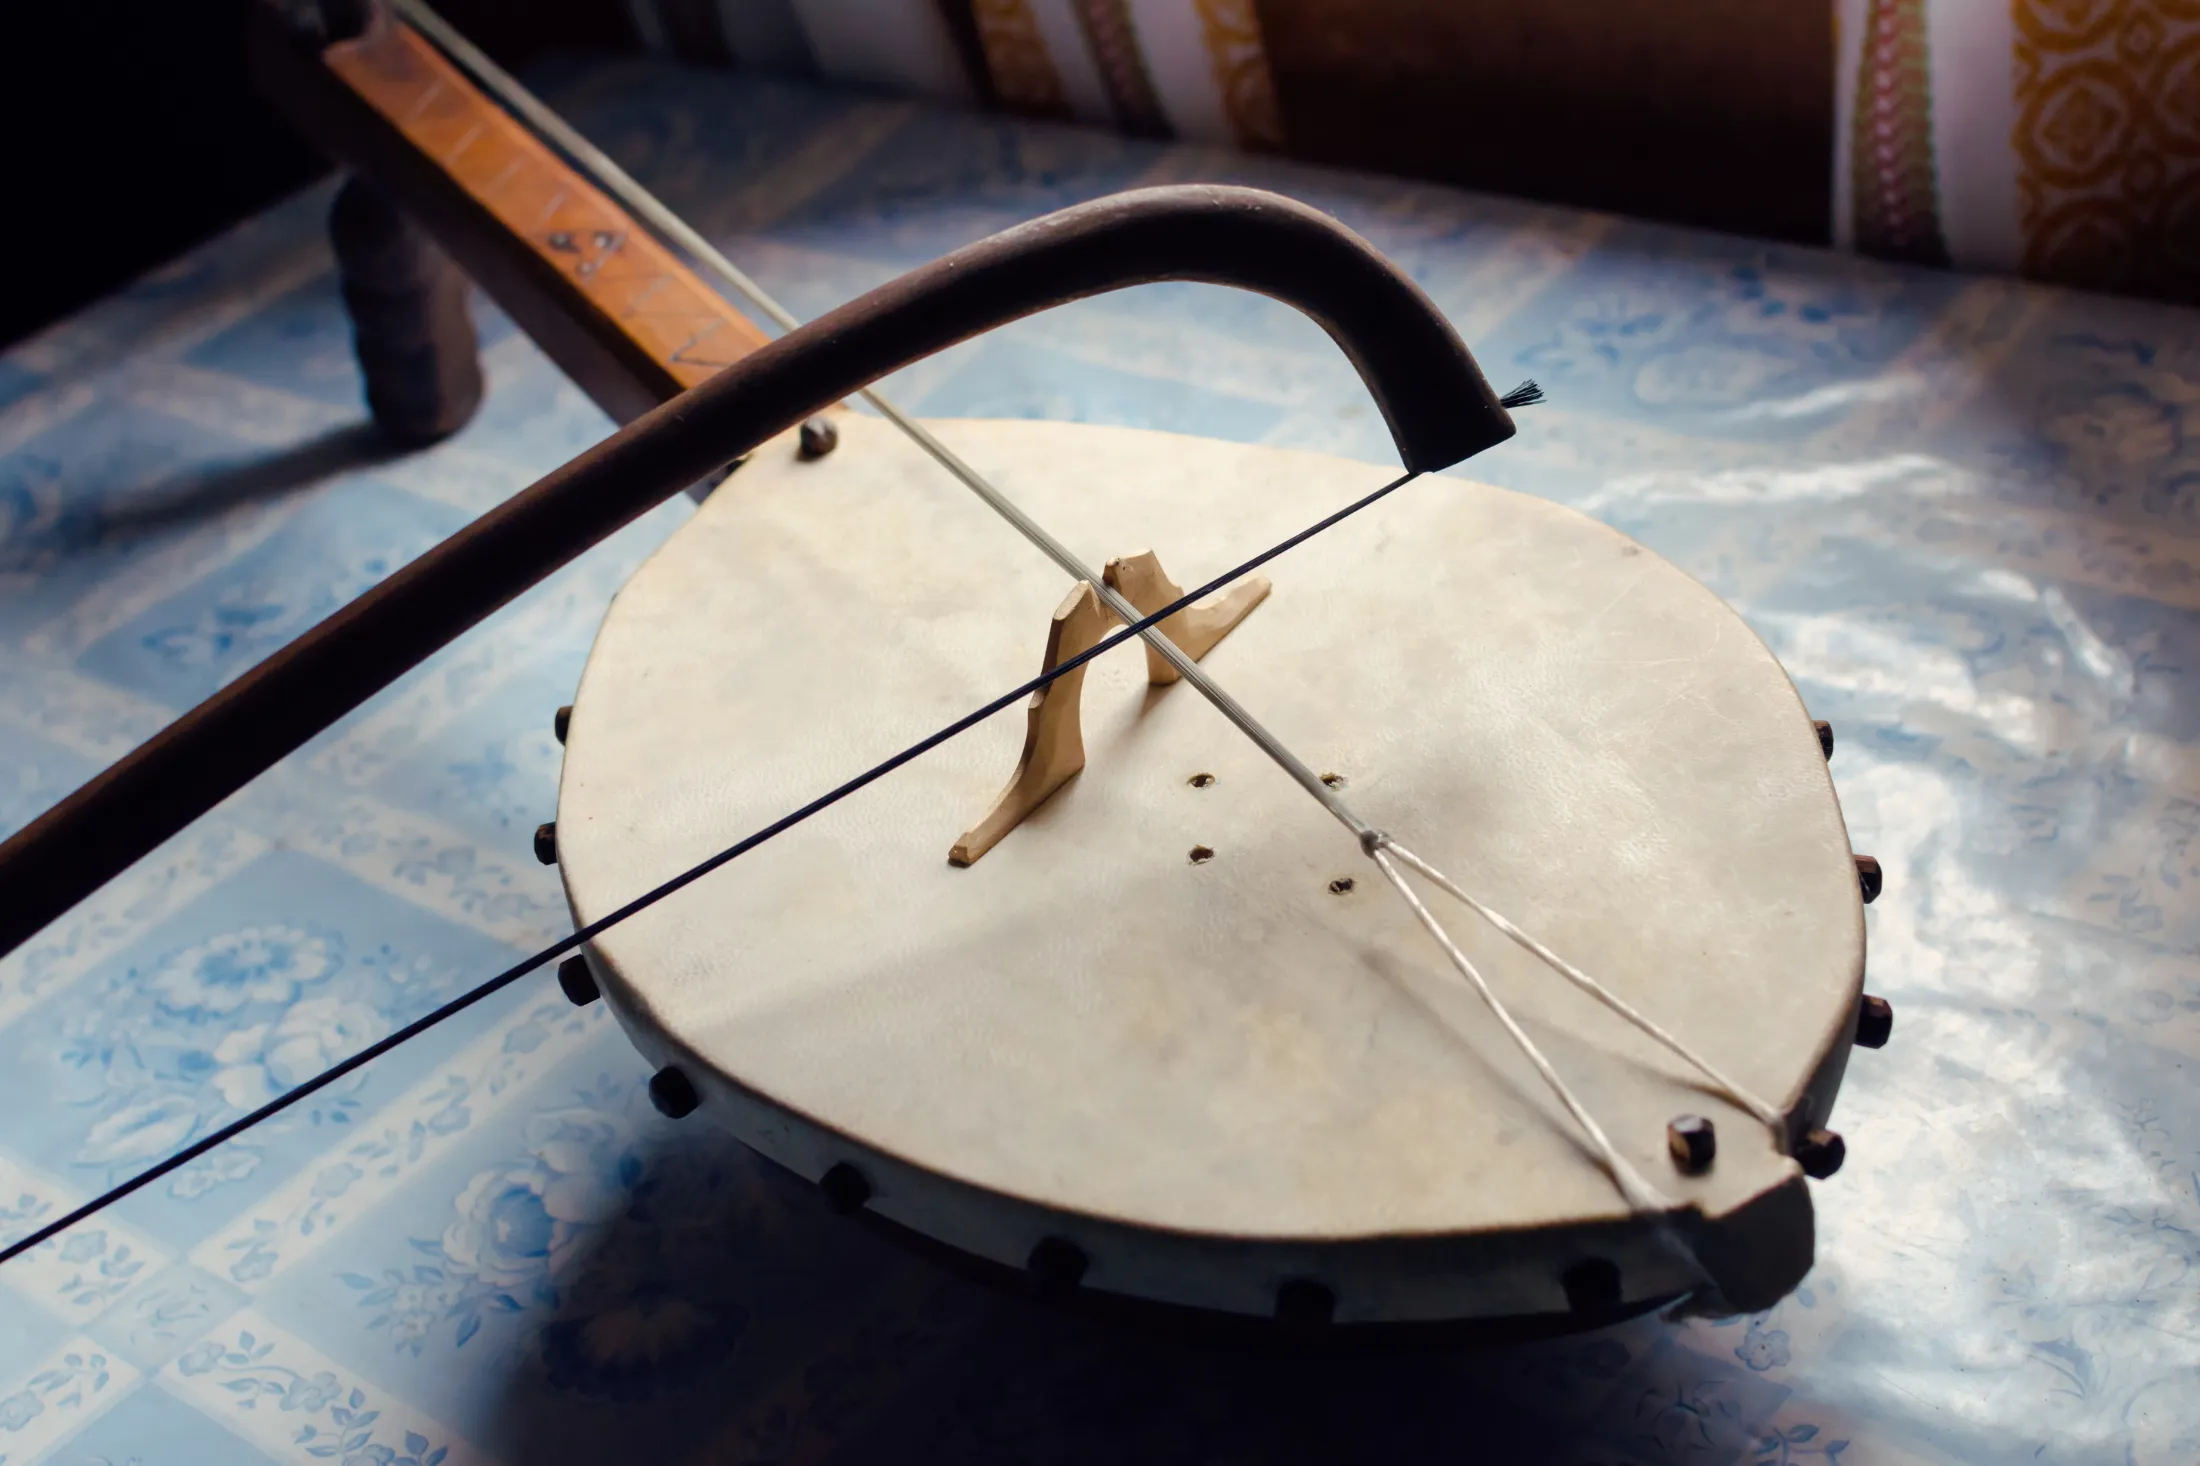 Gusle, Montenegro’s traditional one-stringed instrument.